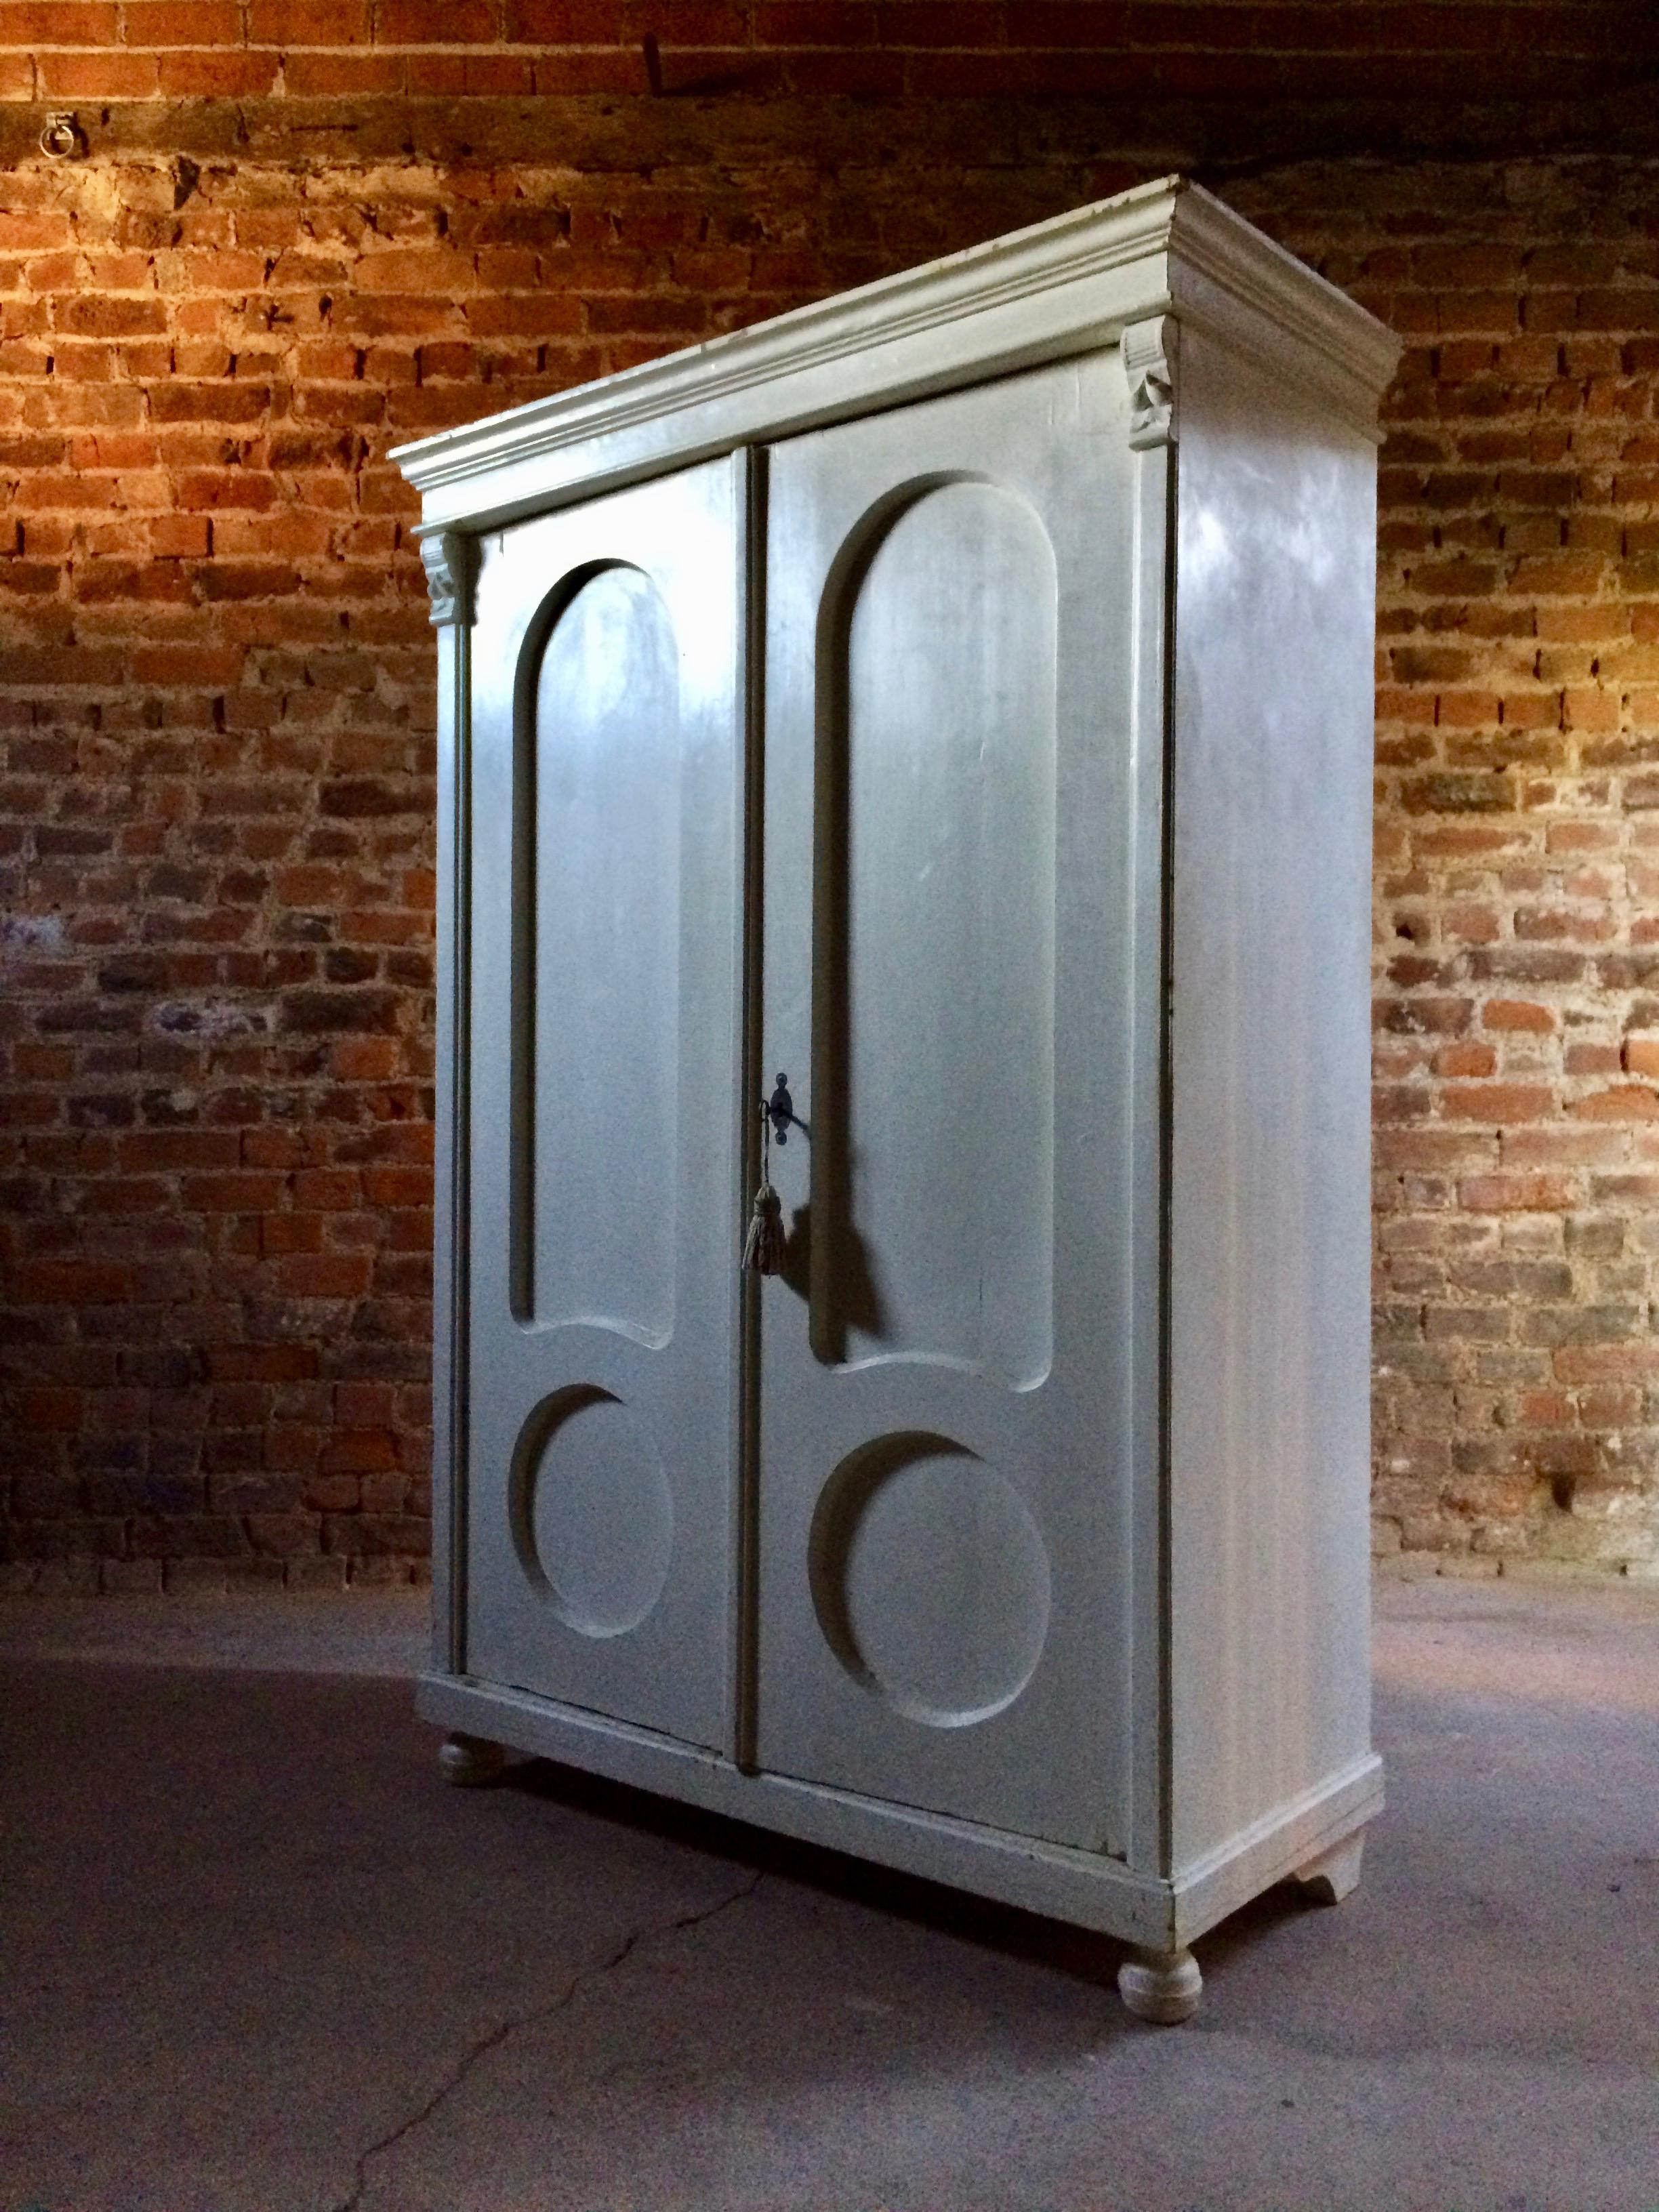 A fabulous antique 19th century French armoire wardrobe circa 1890, the moulded cornice above a pair of panelled doors enclosing a single hanging rail, raised on bun feet, comes with one working key with tassel.

Condition report: The cornice is